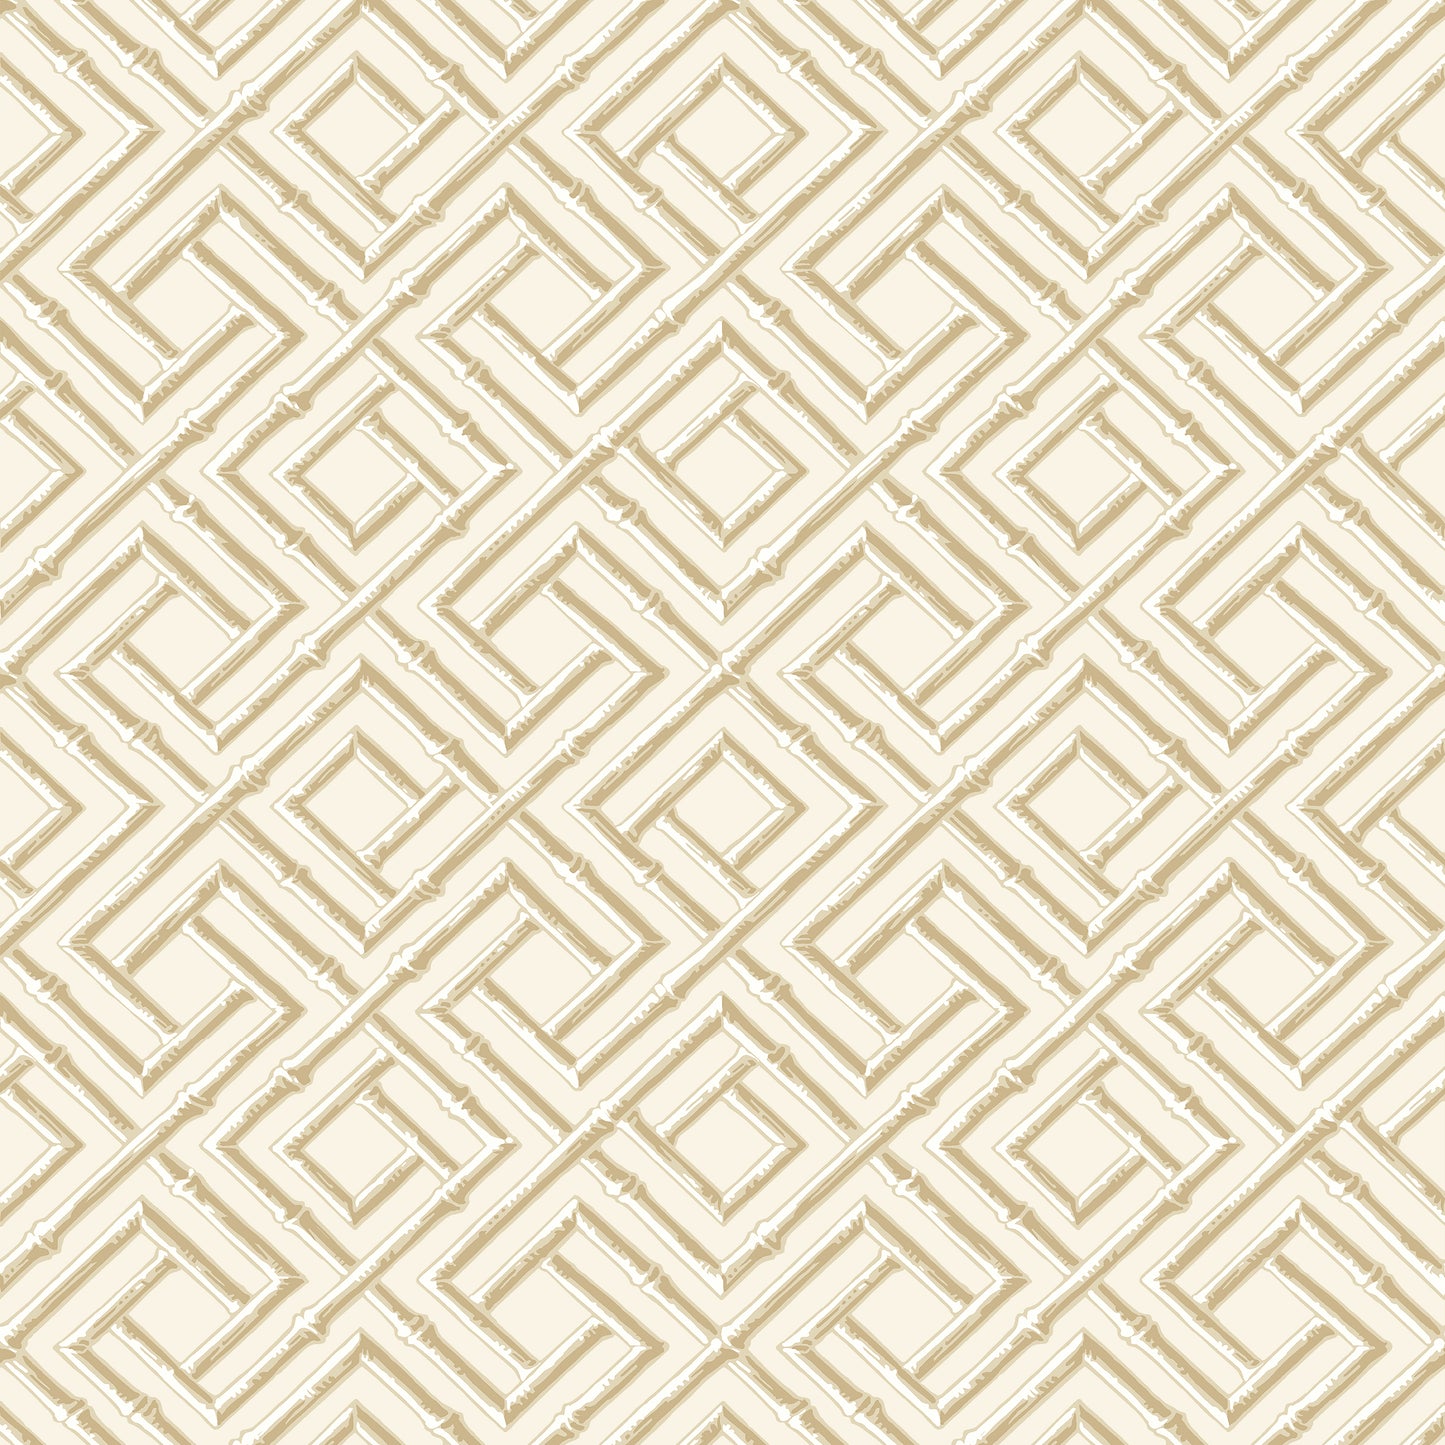 Purchase Thibaut Wallpaper Product T42047 pattern name French Lattice color Beige. 